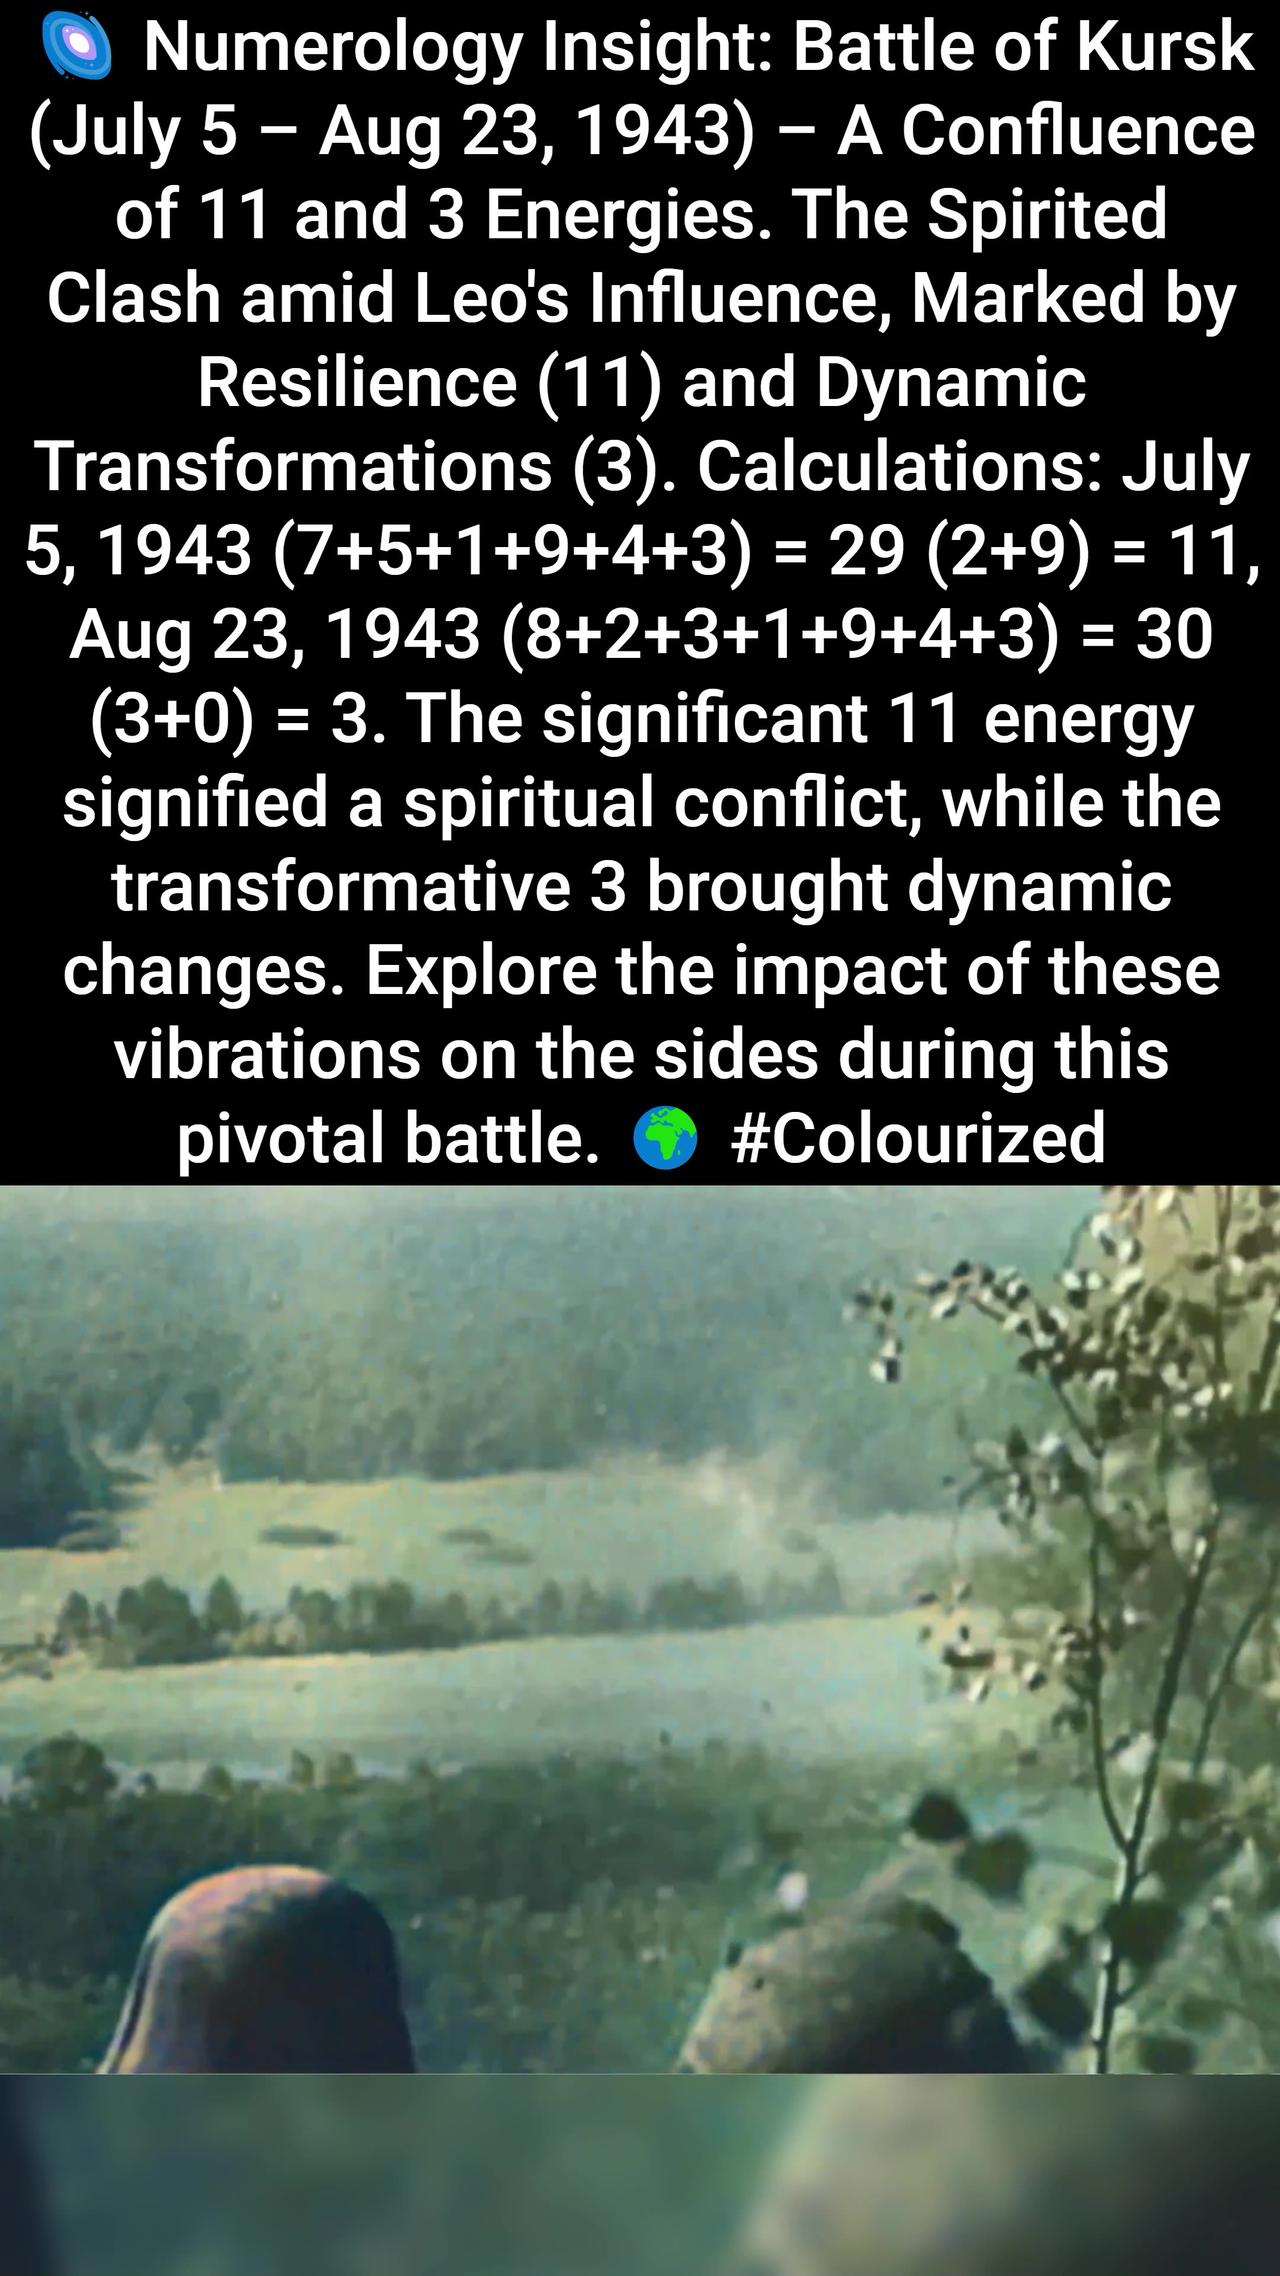 WW2 03 - Numerology Insight Battle of Kursk (July 5 – Aug 23, 1943) – A Confluence of 11